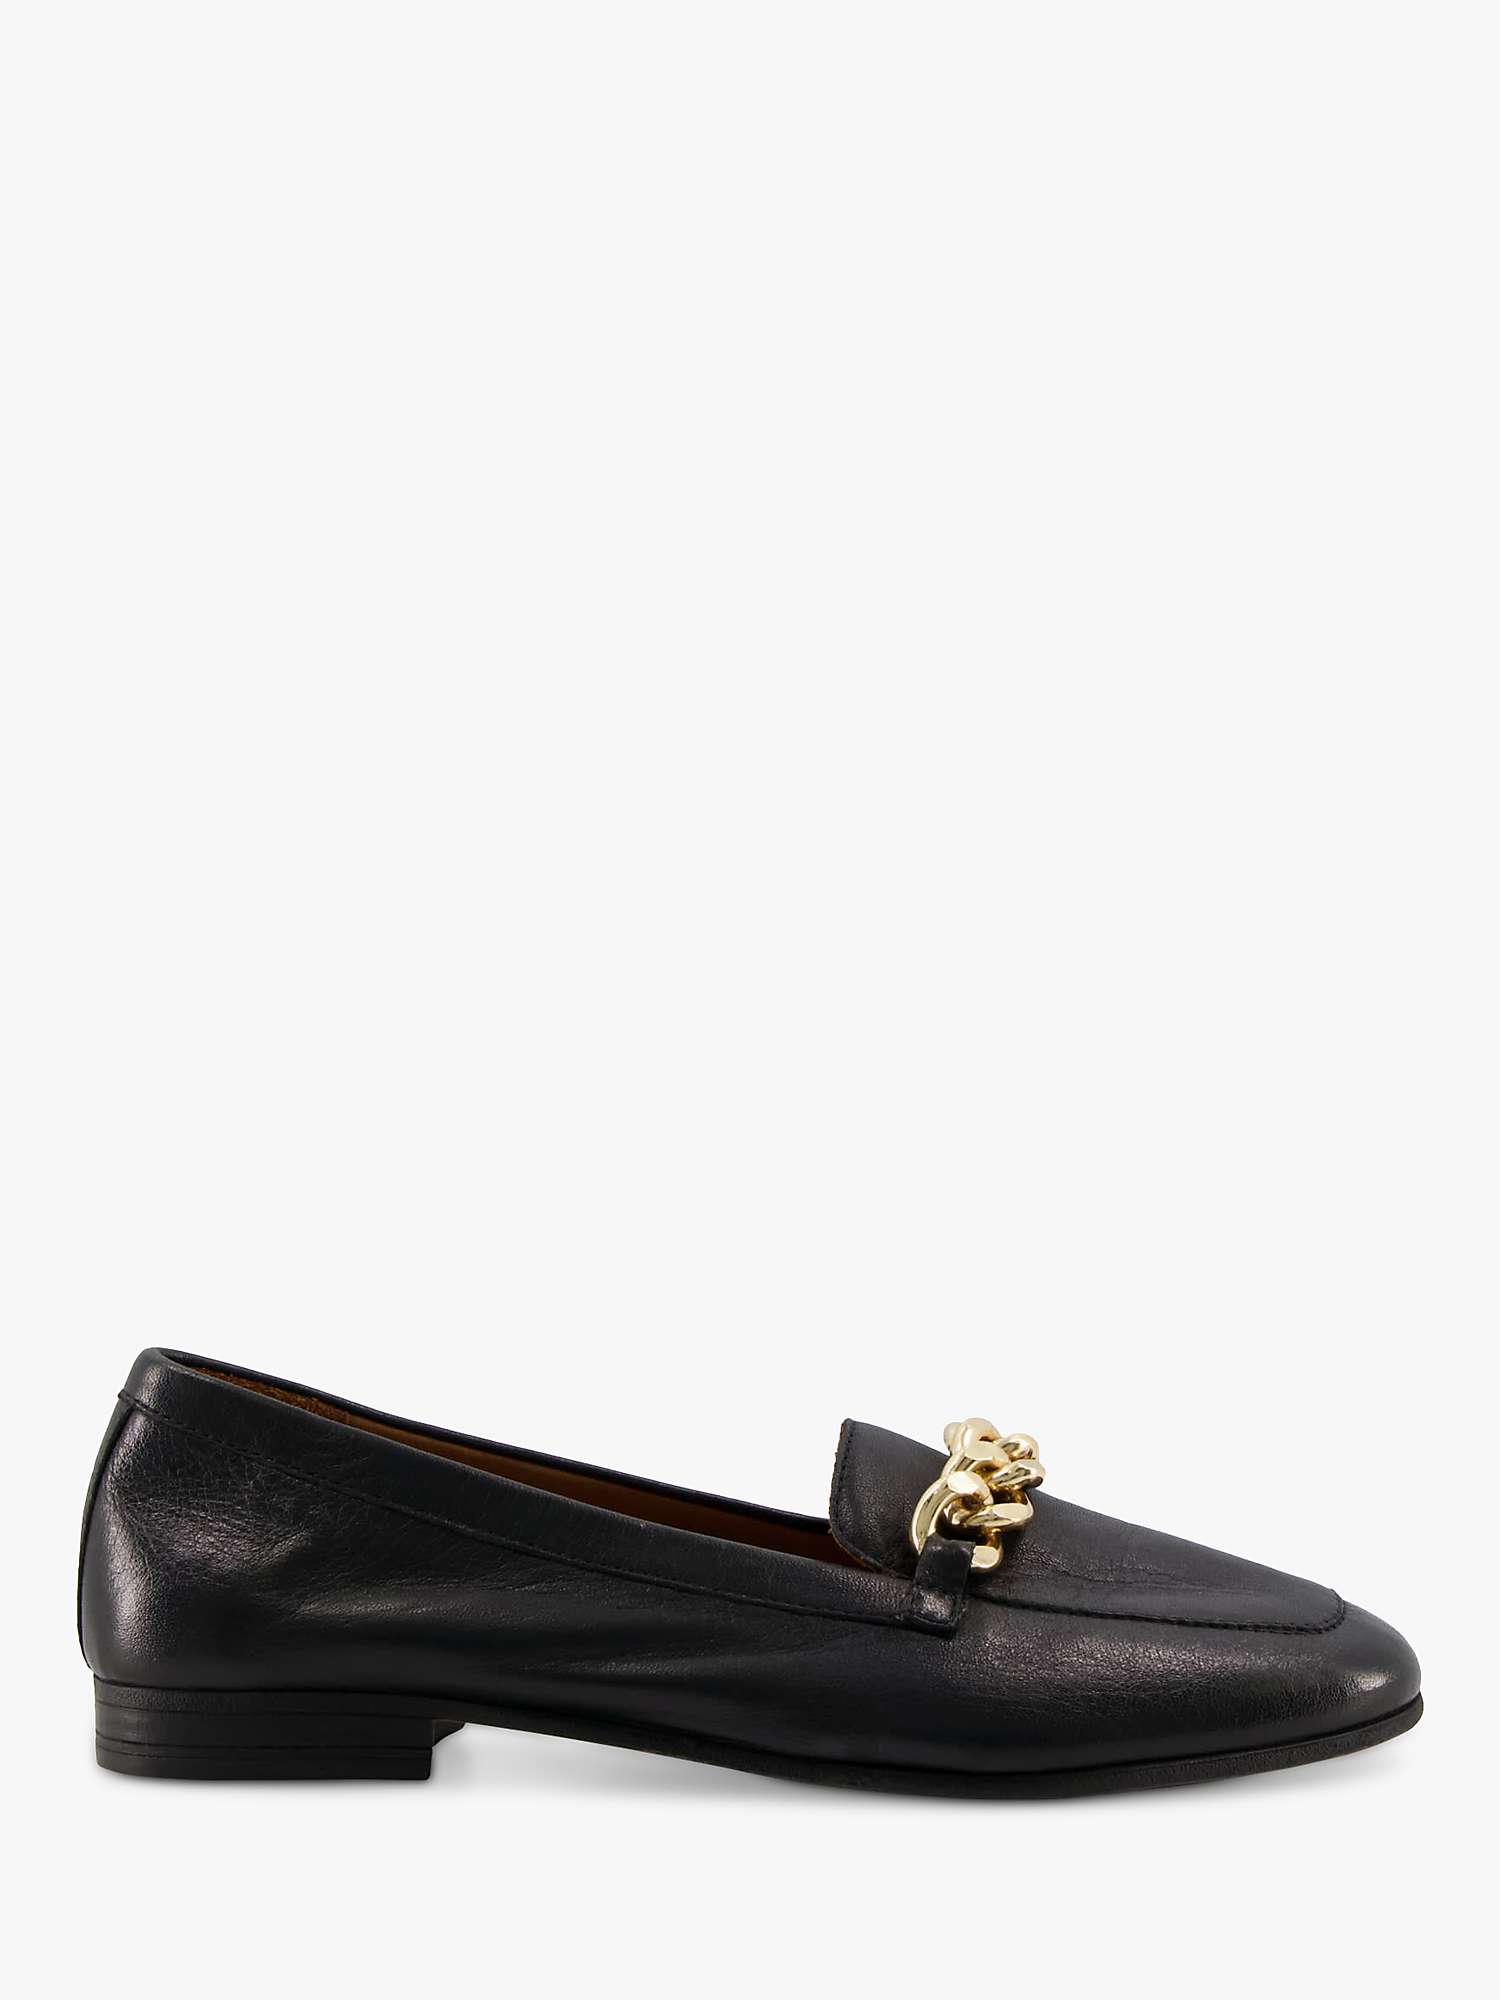 Buy Dune Goldsmith Leather Chain Detail Loafers Online at johnlewis.com